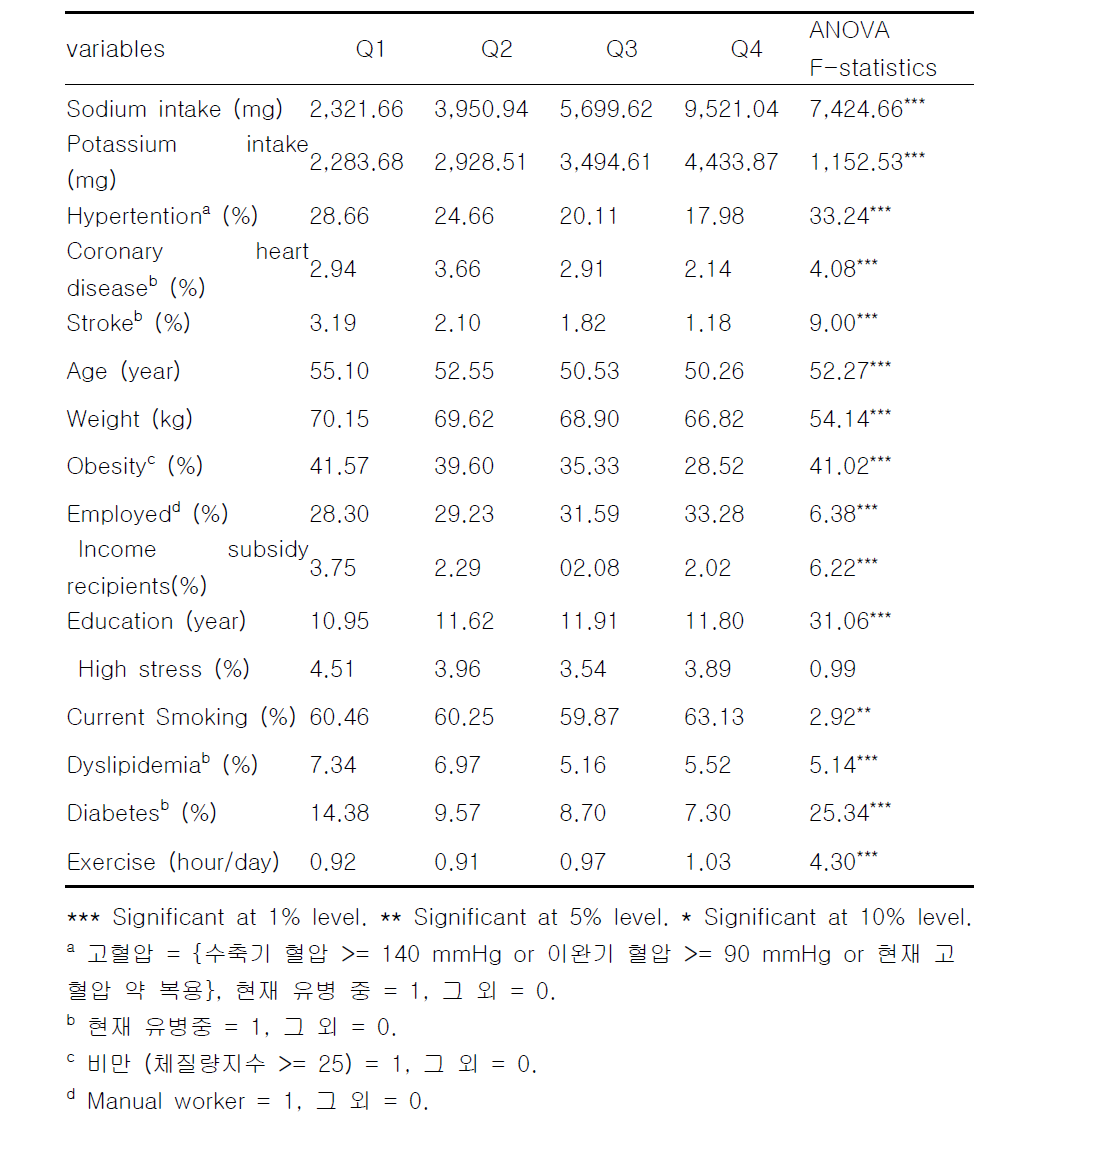 Summary statistics for data used by the quartile of sodium intake per unit weight - men